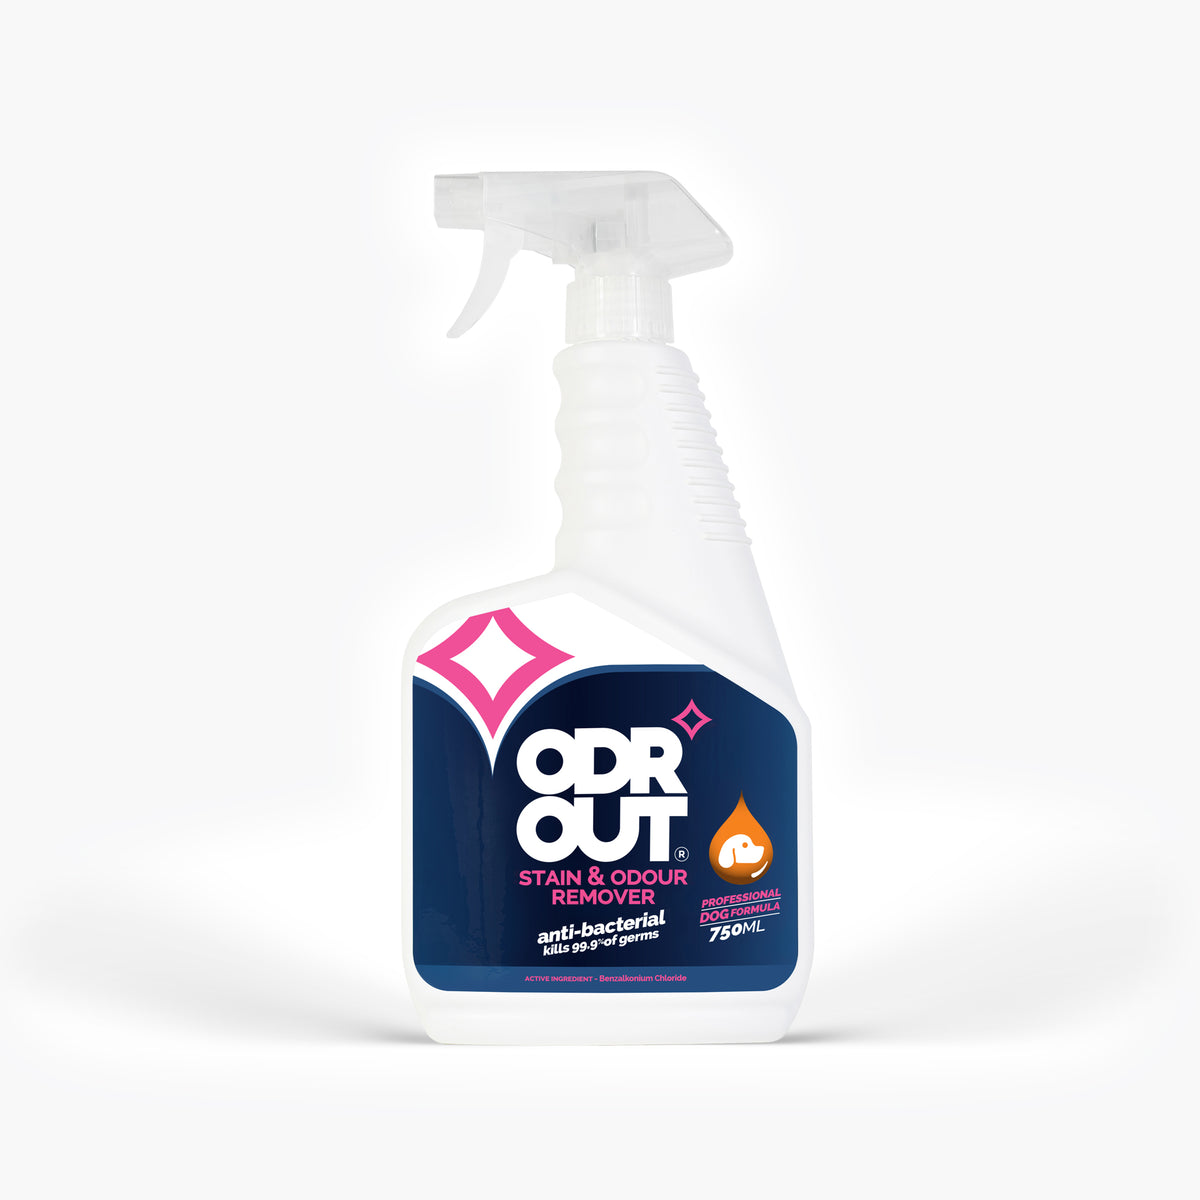 ODR OUT Stain And Odour Remover - Dog